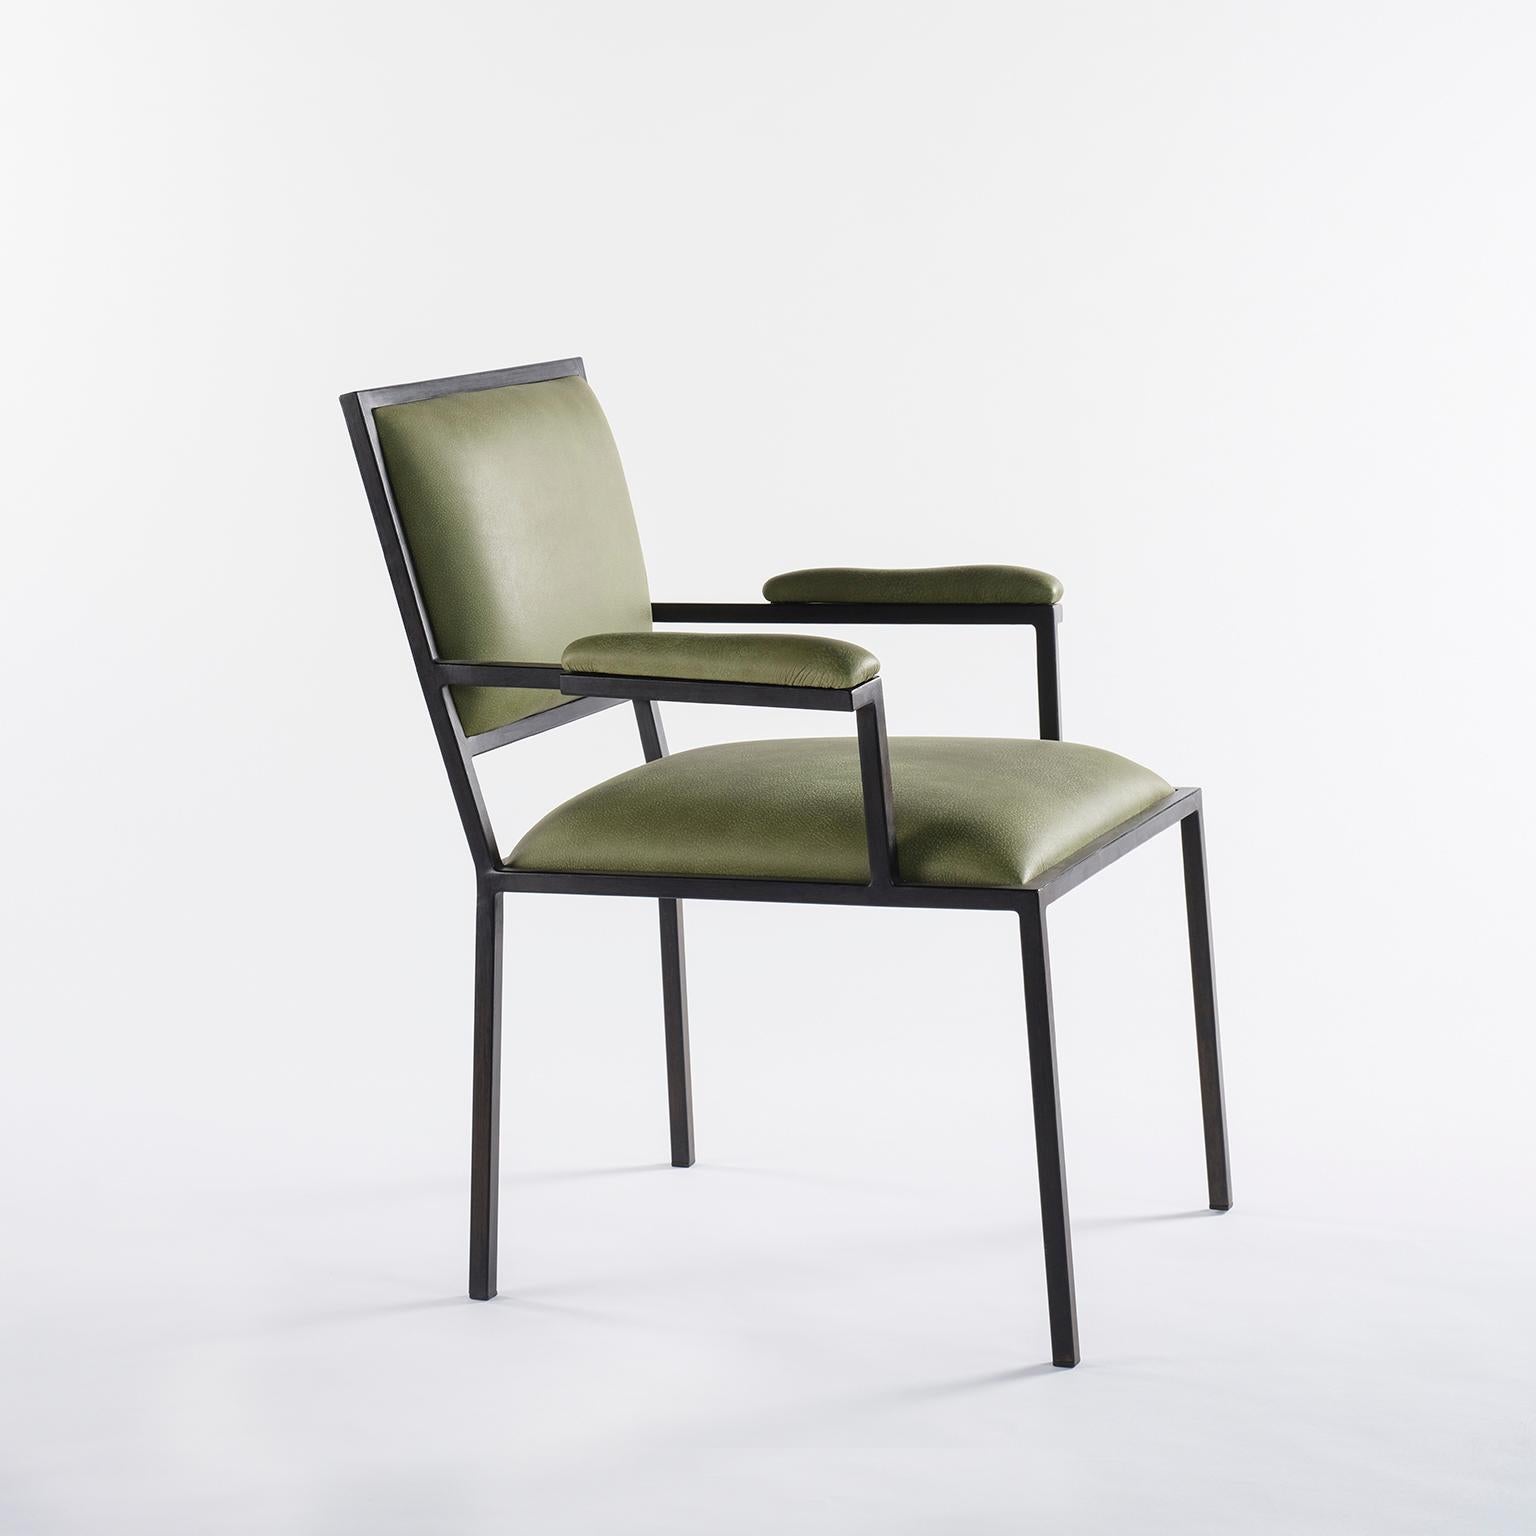 Designed for Alle Scuderie restaurant, a leathered upholstered armchair, in a simple linear frame.
This light-weight design comes in a wide range of Italian leathers and it combines very well with classic and modern interiors.